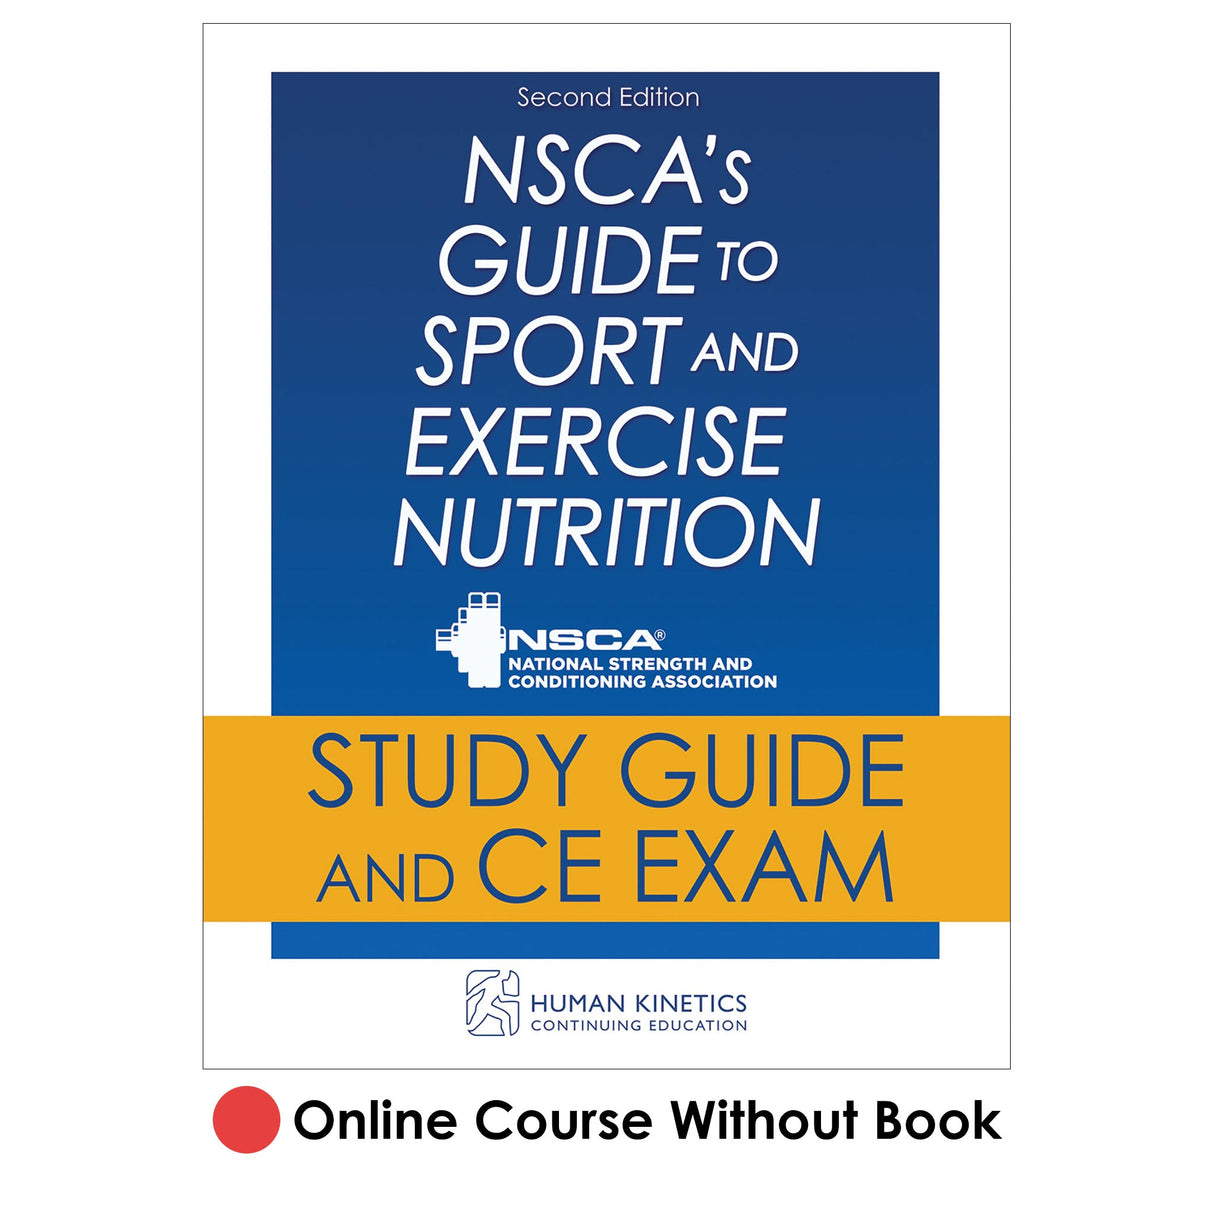 NSCA's Guide to Sport and Exercise Nutrition 2nd Edition Online CE Course Without Book